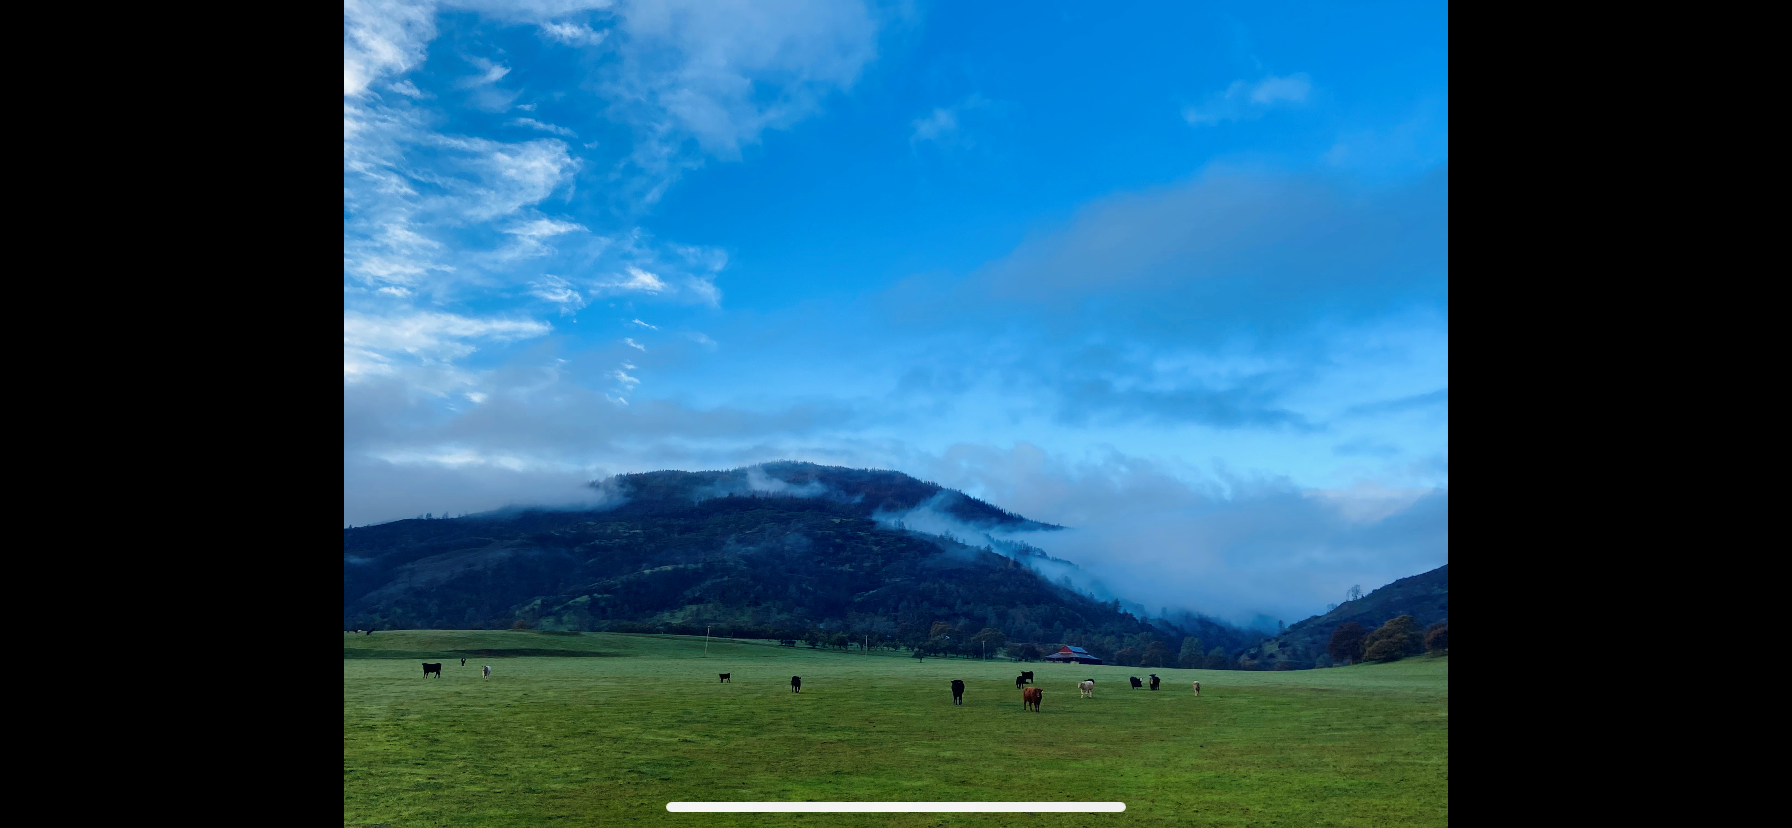 Photo By: Arynne Gregory March 17, 2022 - Daytime shot of cows in a field and fog over the mountains